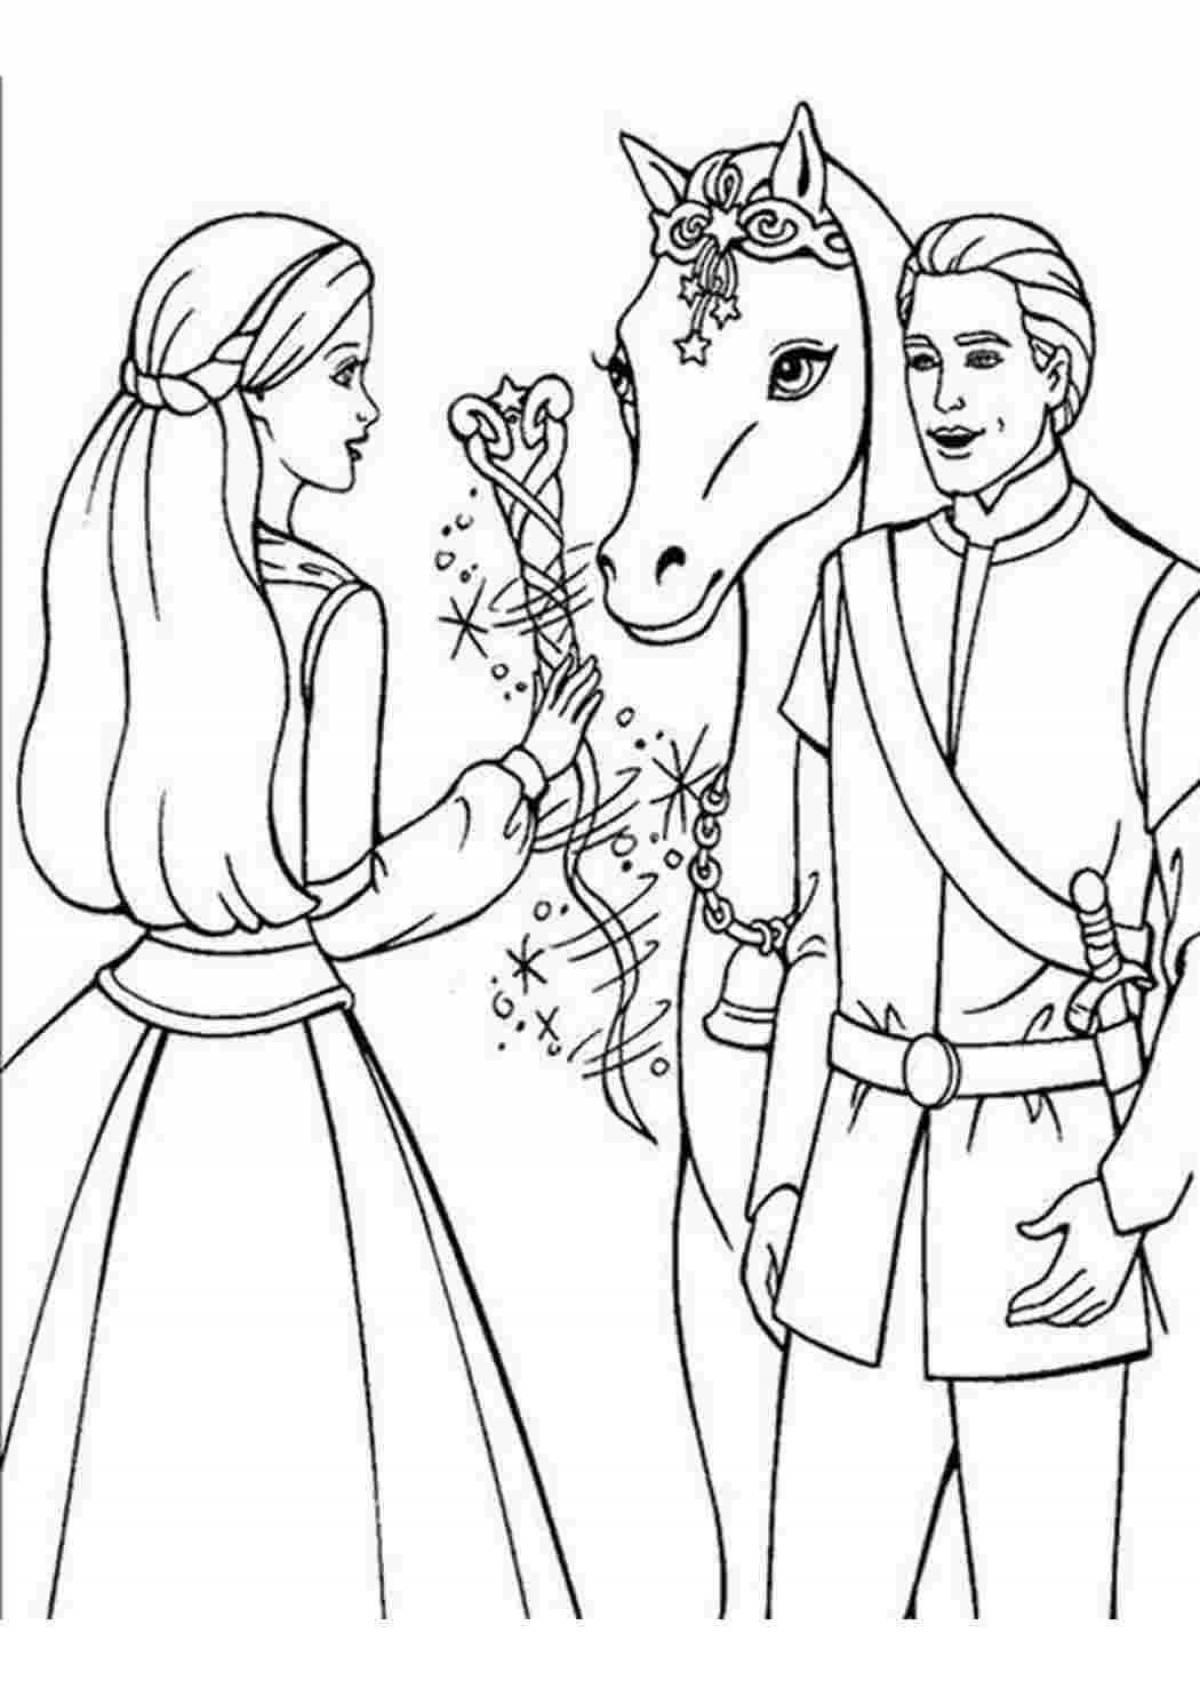 Bright barbie on horse coloring page